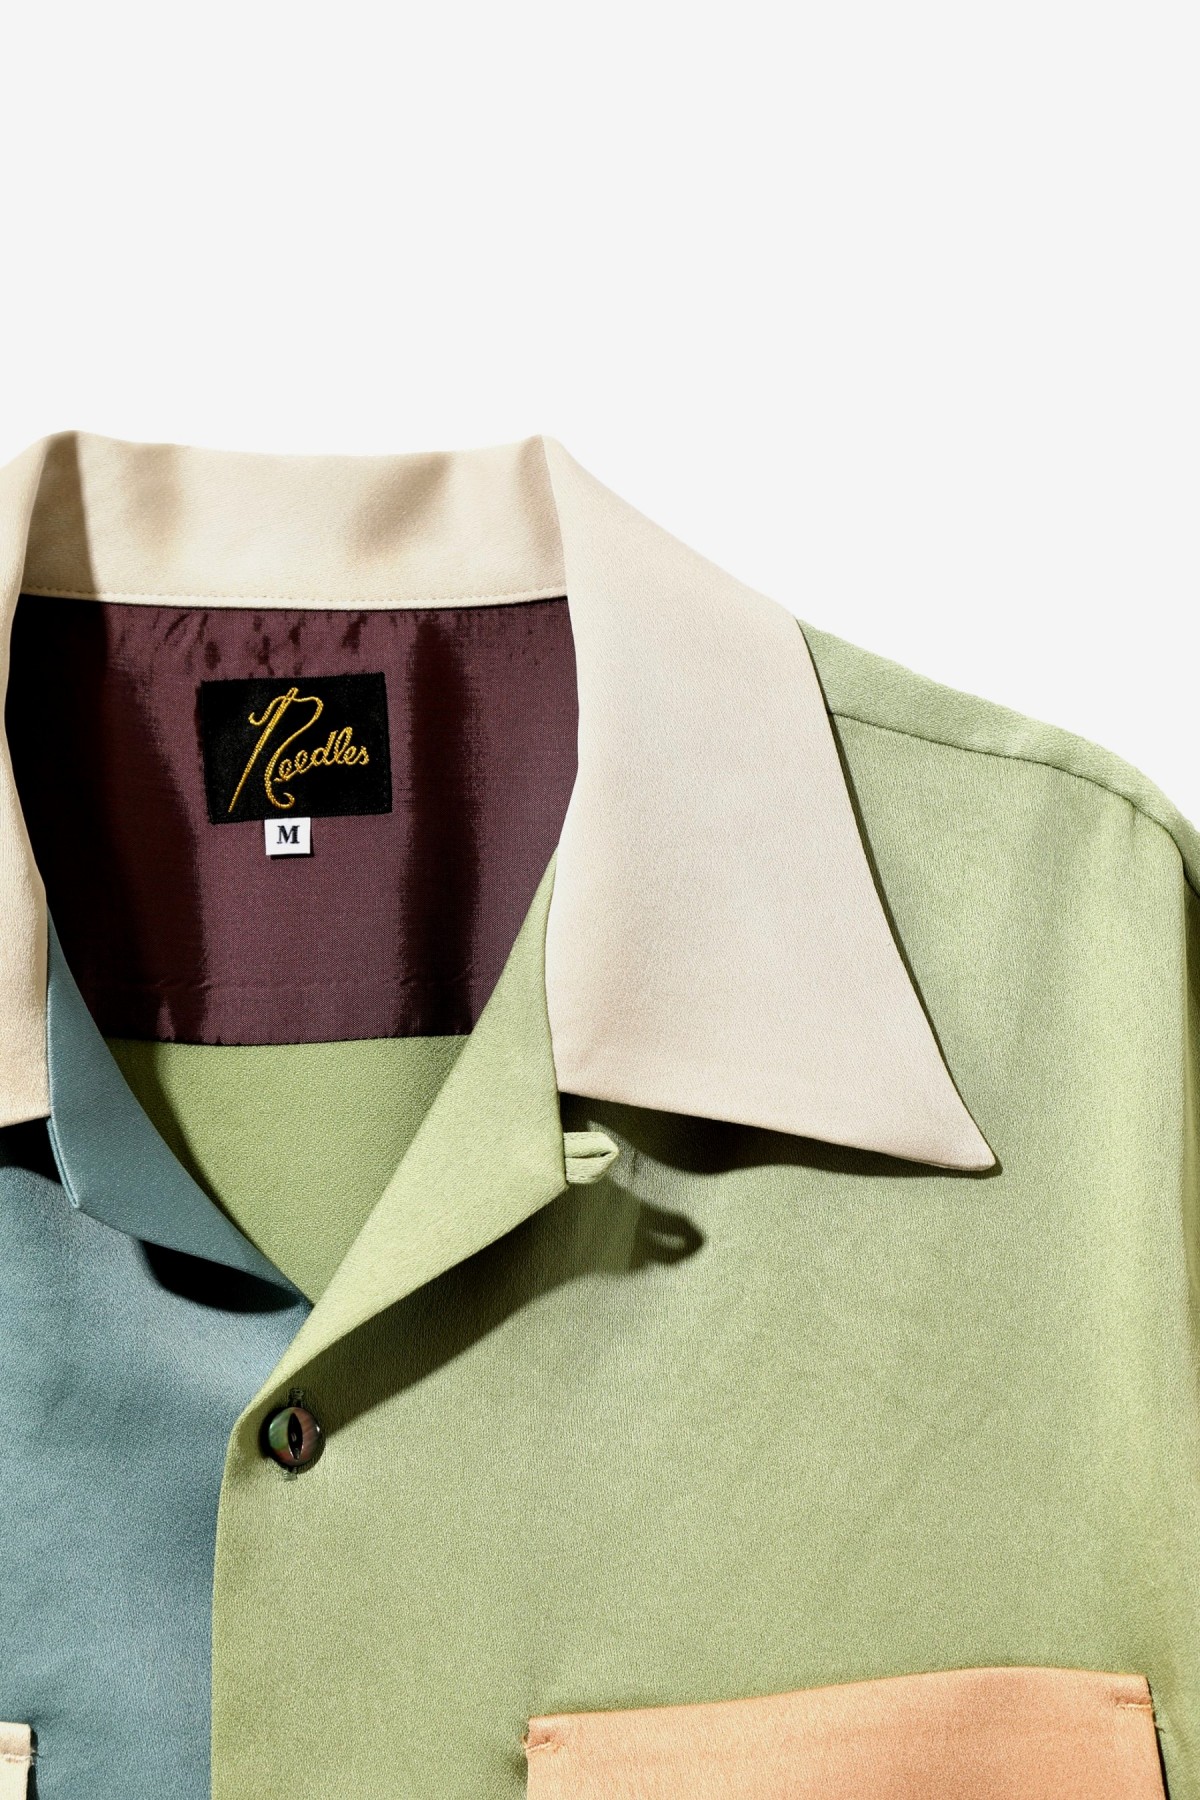 Needles S/S Classic Shirt Poly Sateen in Light Tone